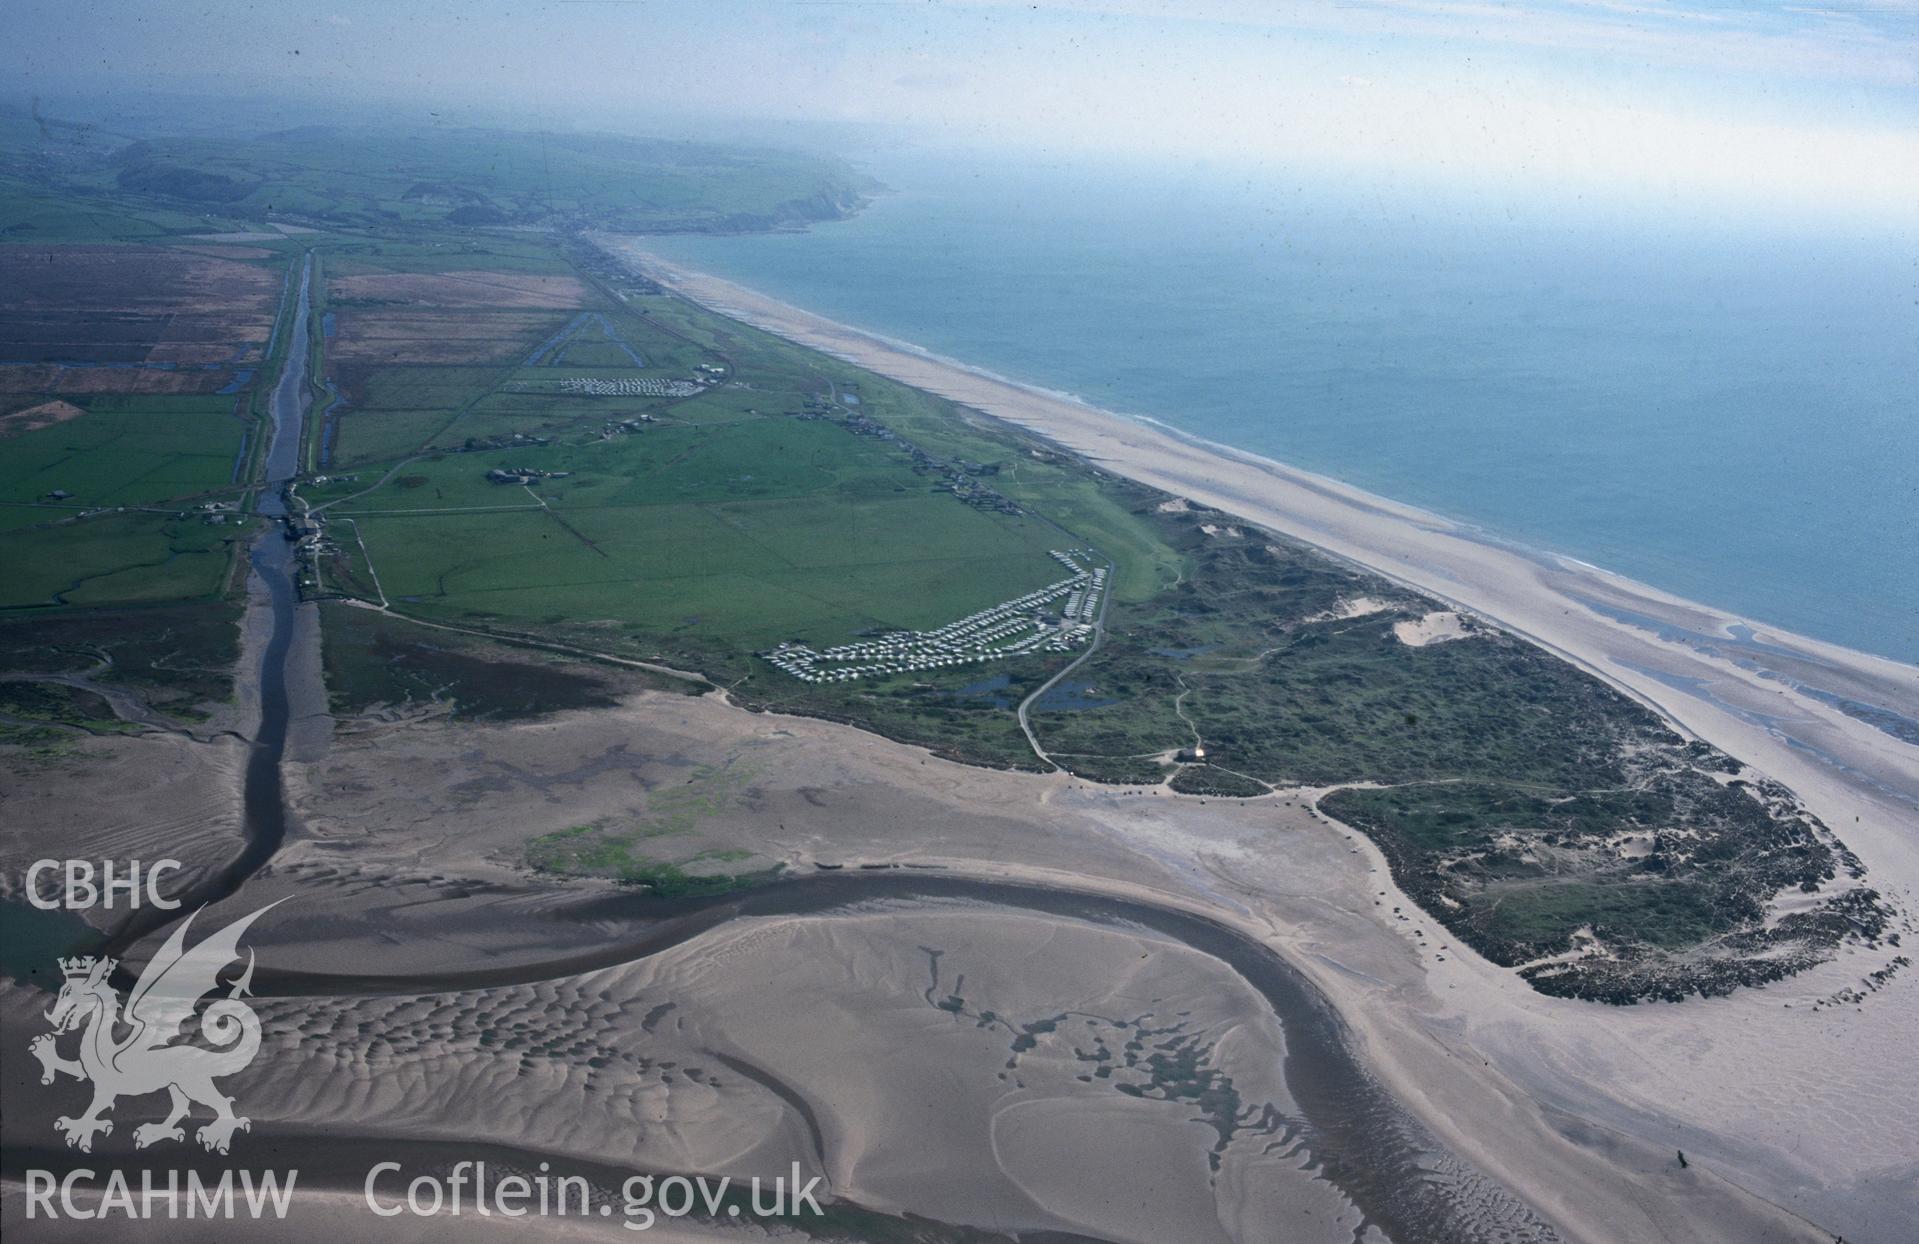 Slide of RCAHMW colour oblique aerial photograph of Ynyslas, Ynyshir National Nature Reserve, taken by T.G. Driver, 29/4/1999.